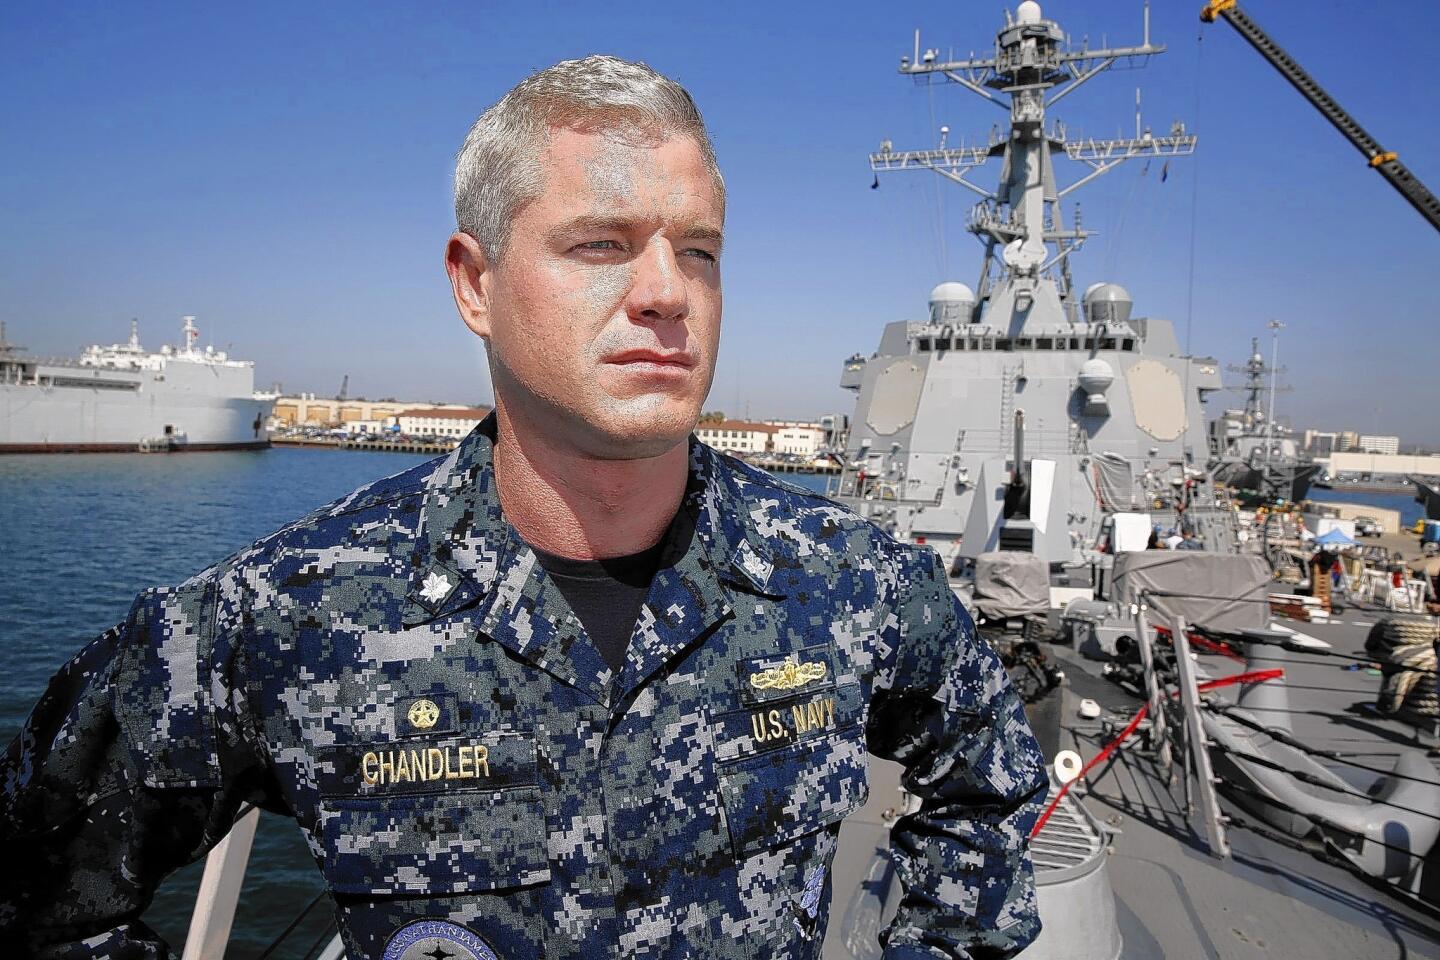 Actor Eric Dane aboard the U.S. Navy destroyer Dewey during filming of "The Last Ship."